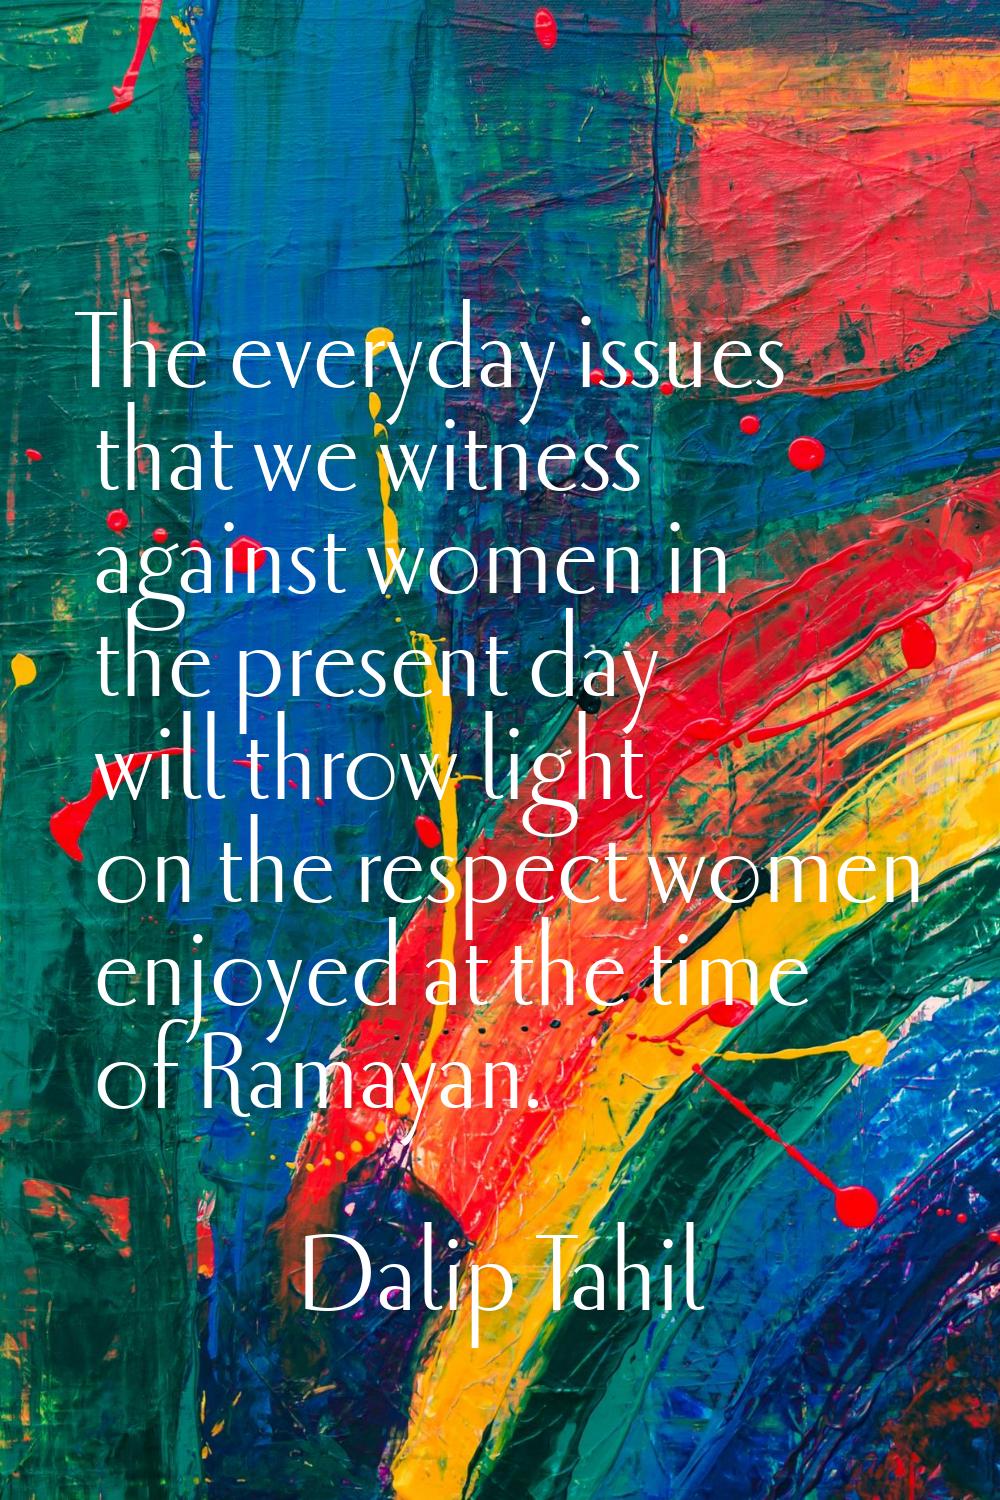 The everyday issues that we witness against women in the present day will throw light on the respec